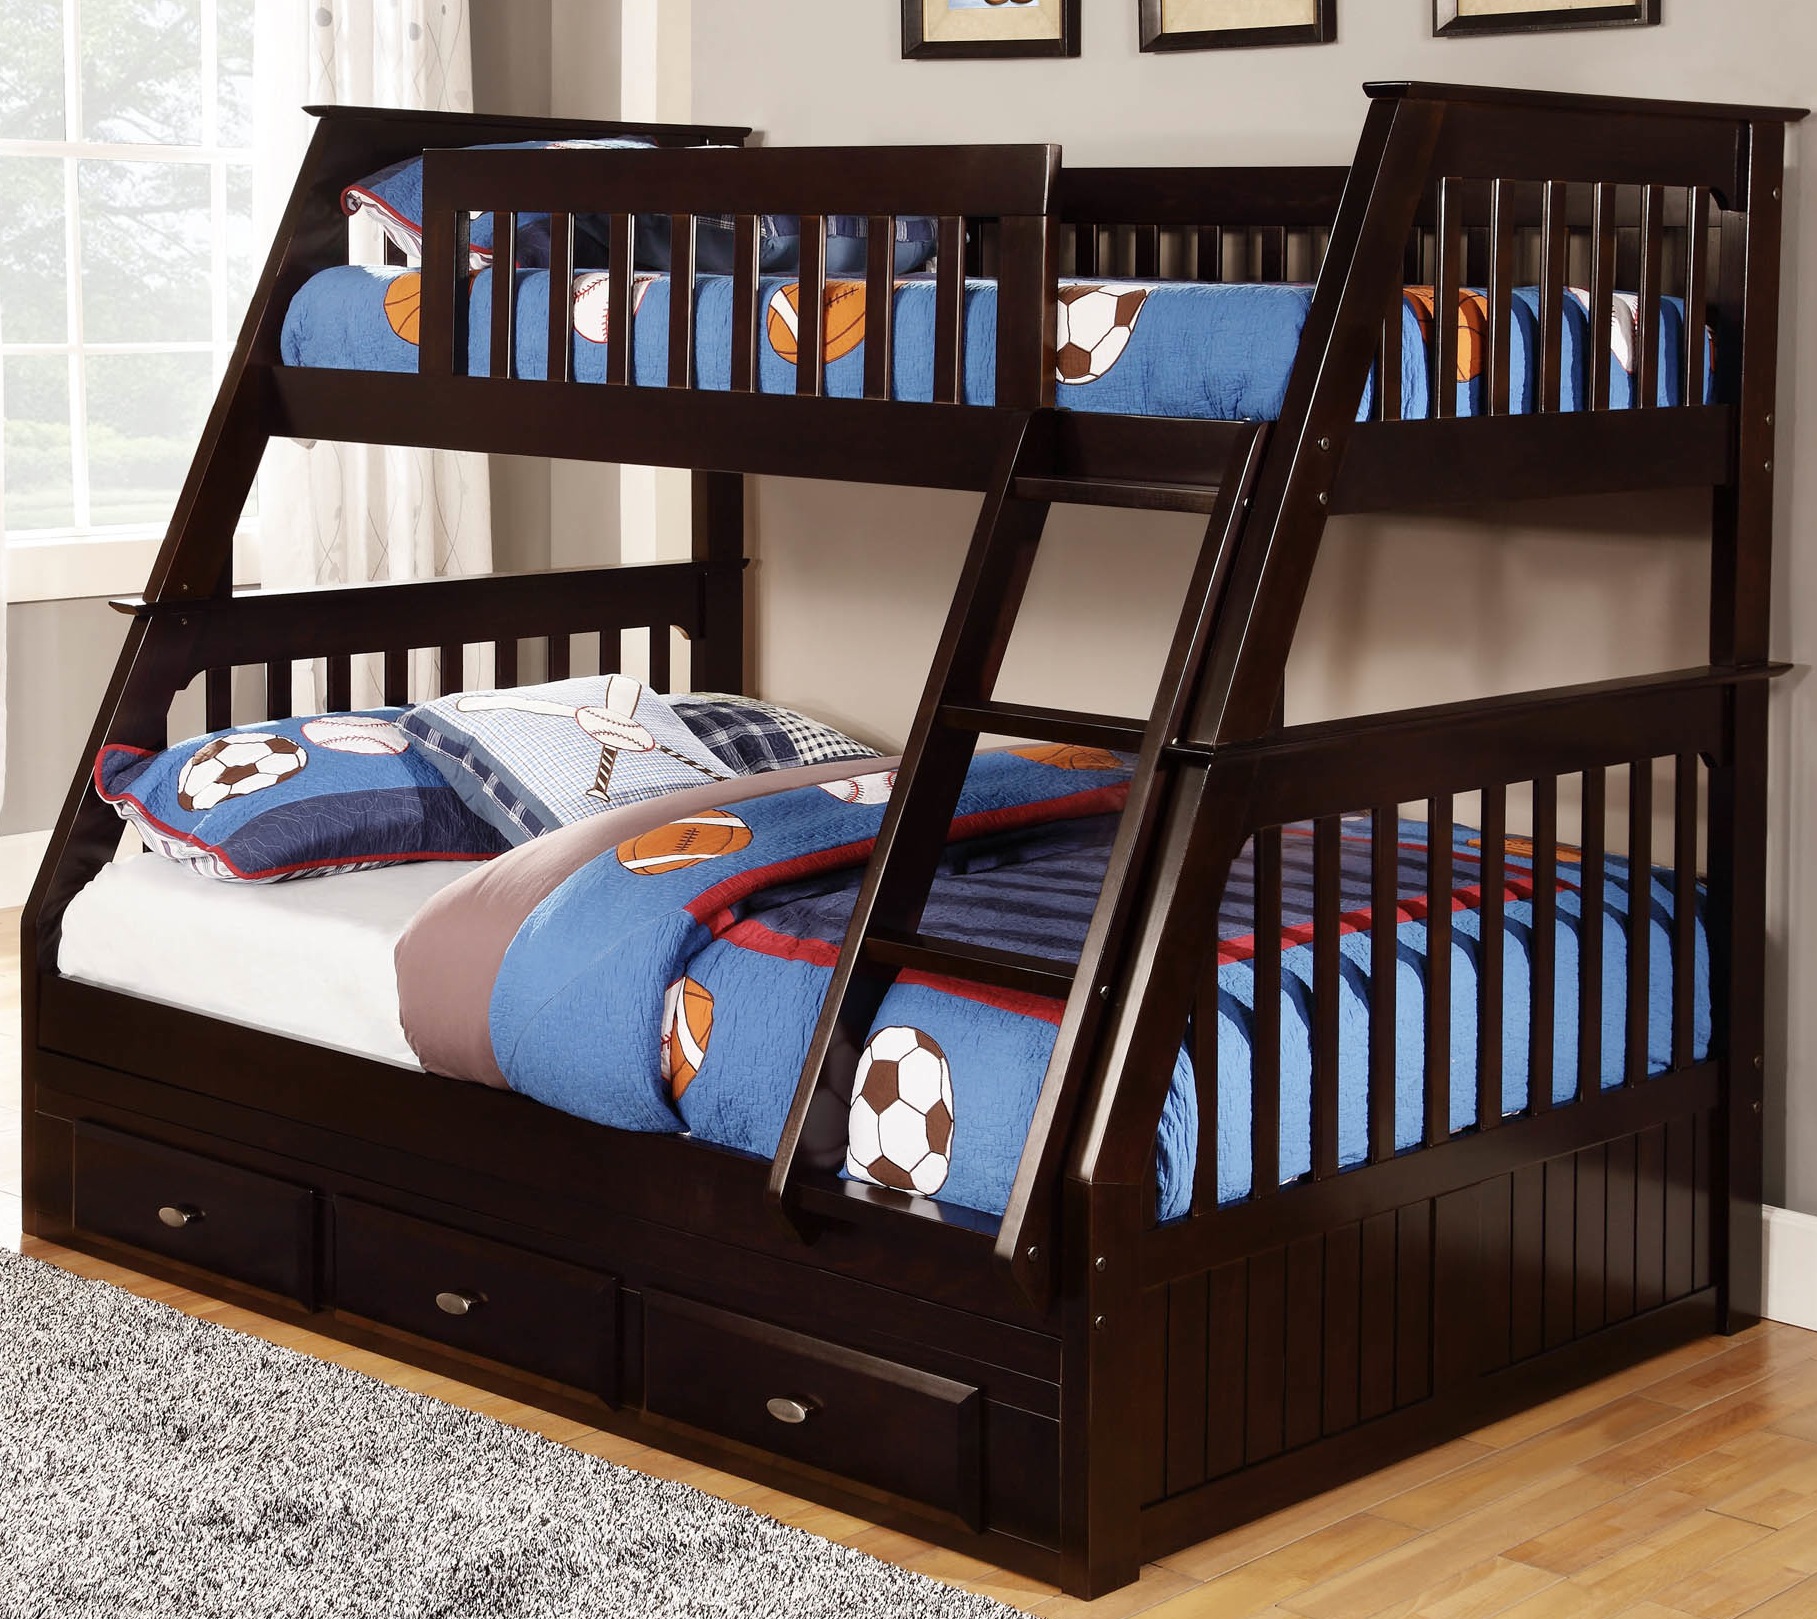 Espresso Mission Bunk Bed Kfs S, Best Twin Over Bunk Beds